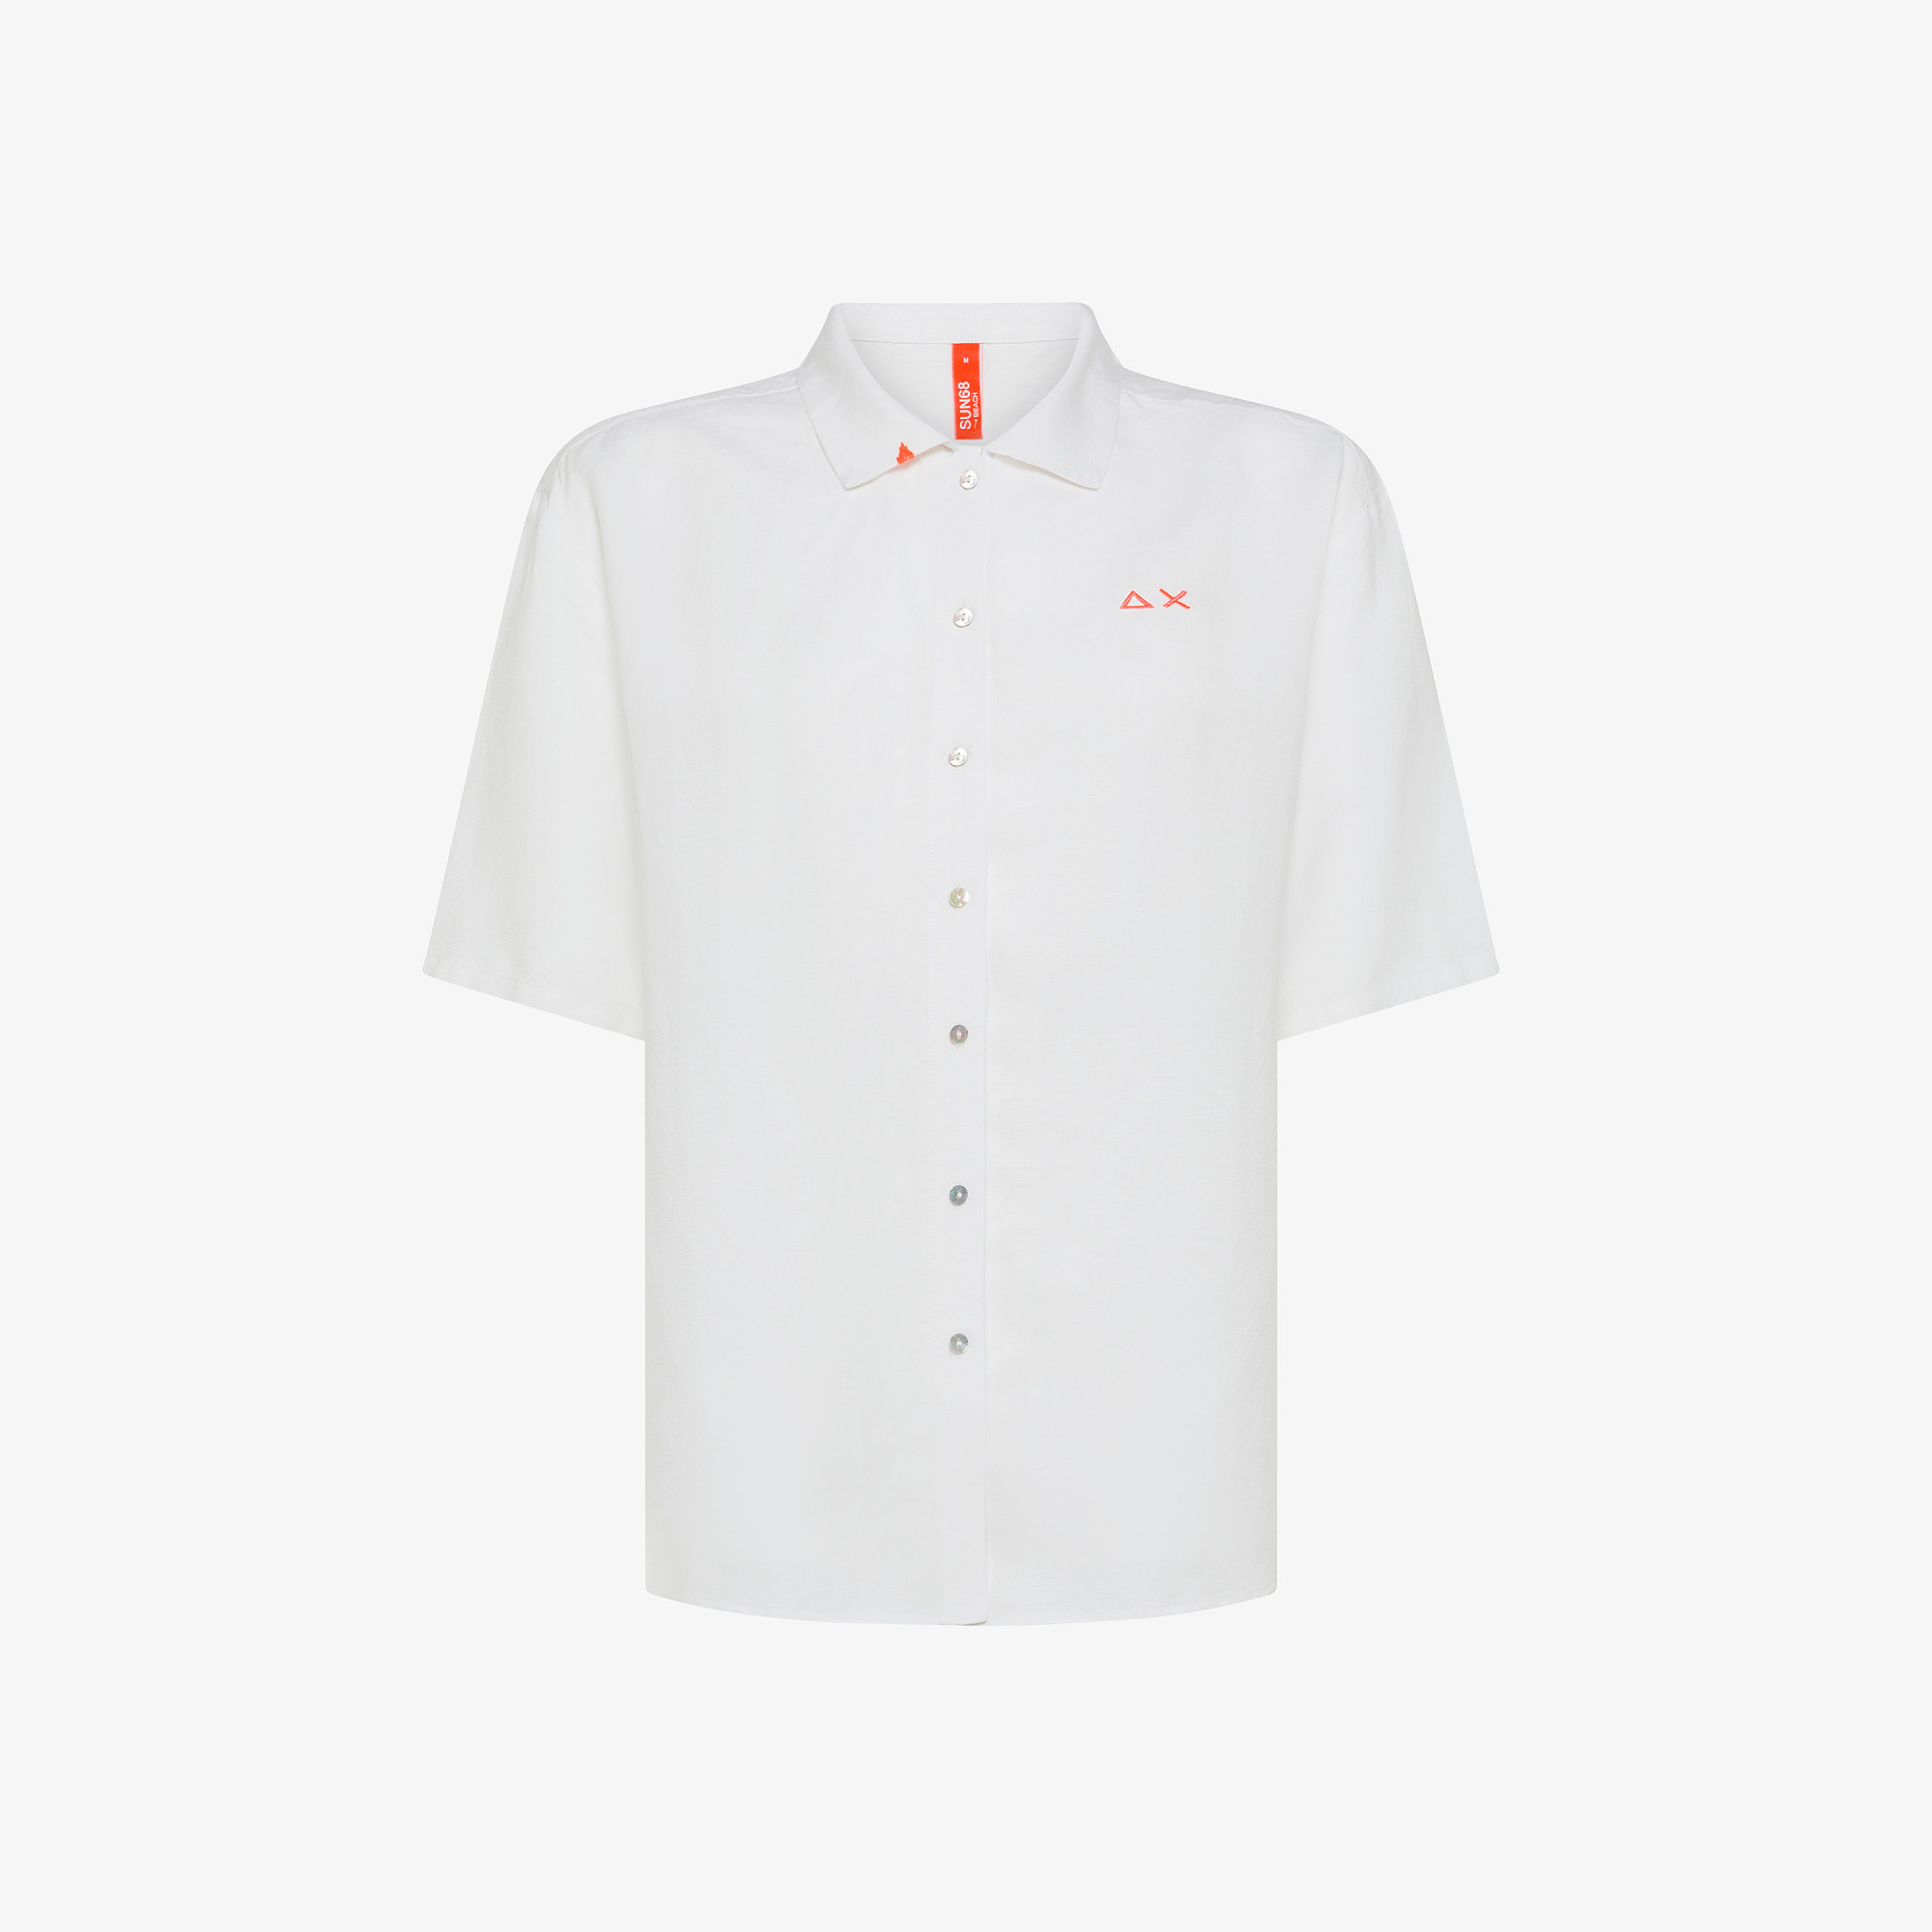 BOWLING SHIRT S/S OFF WHITE